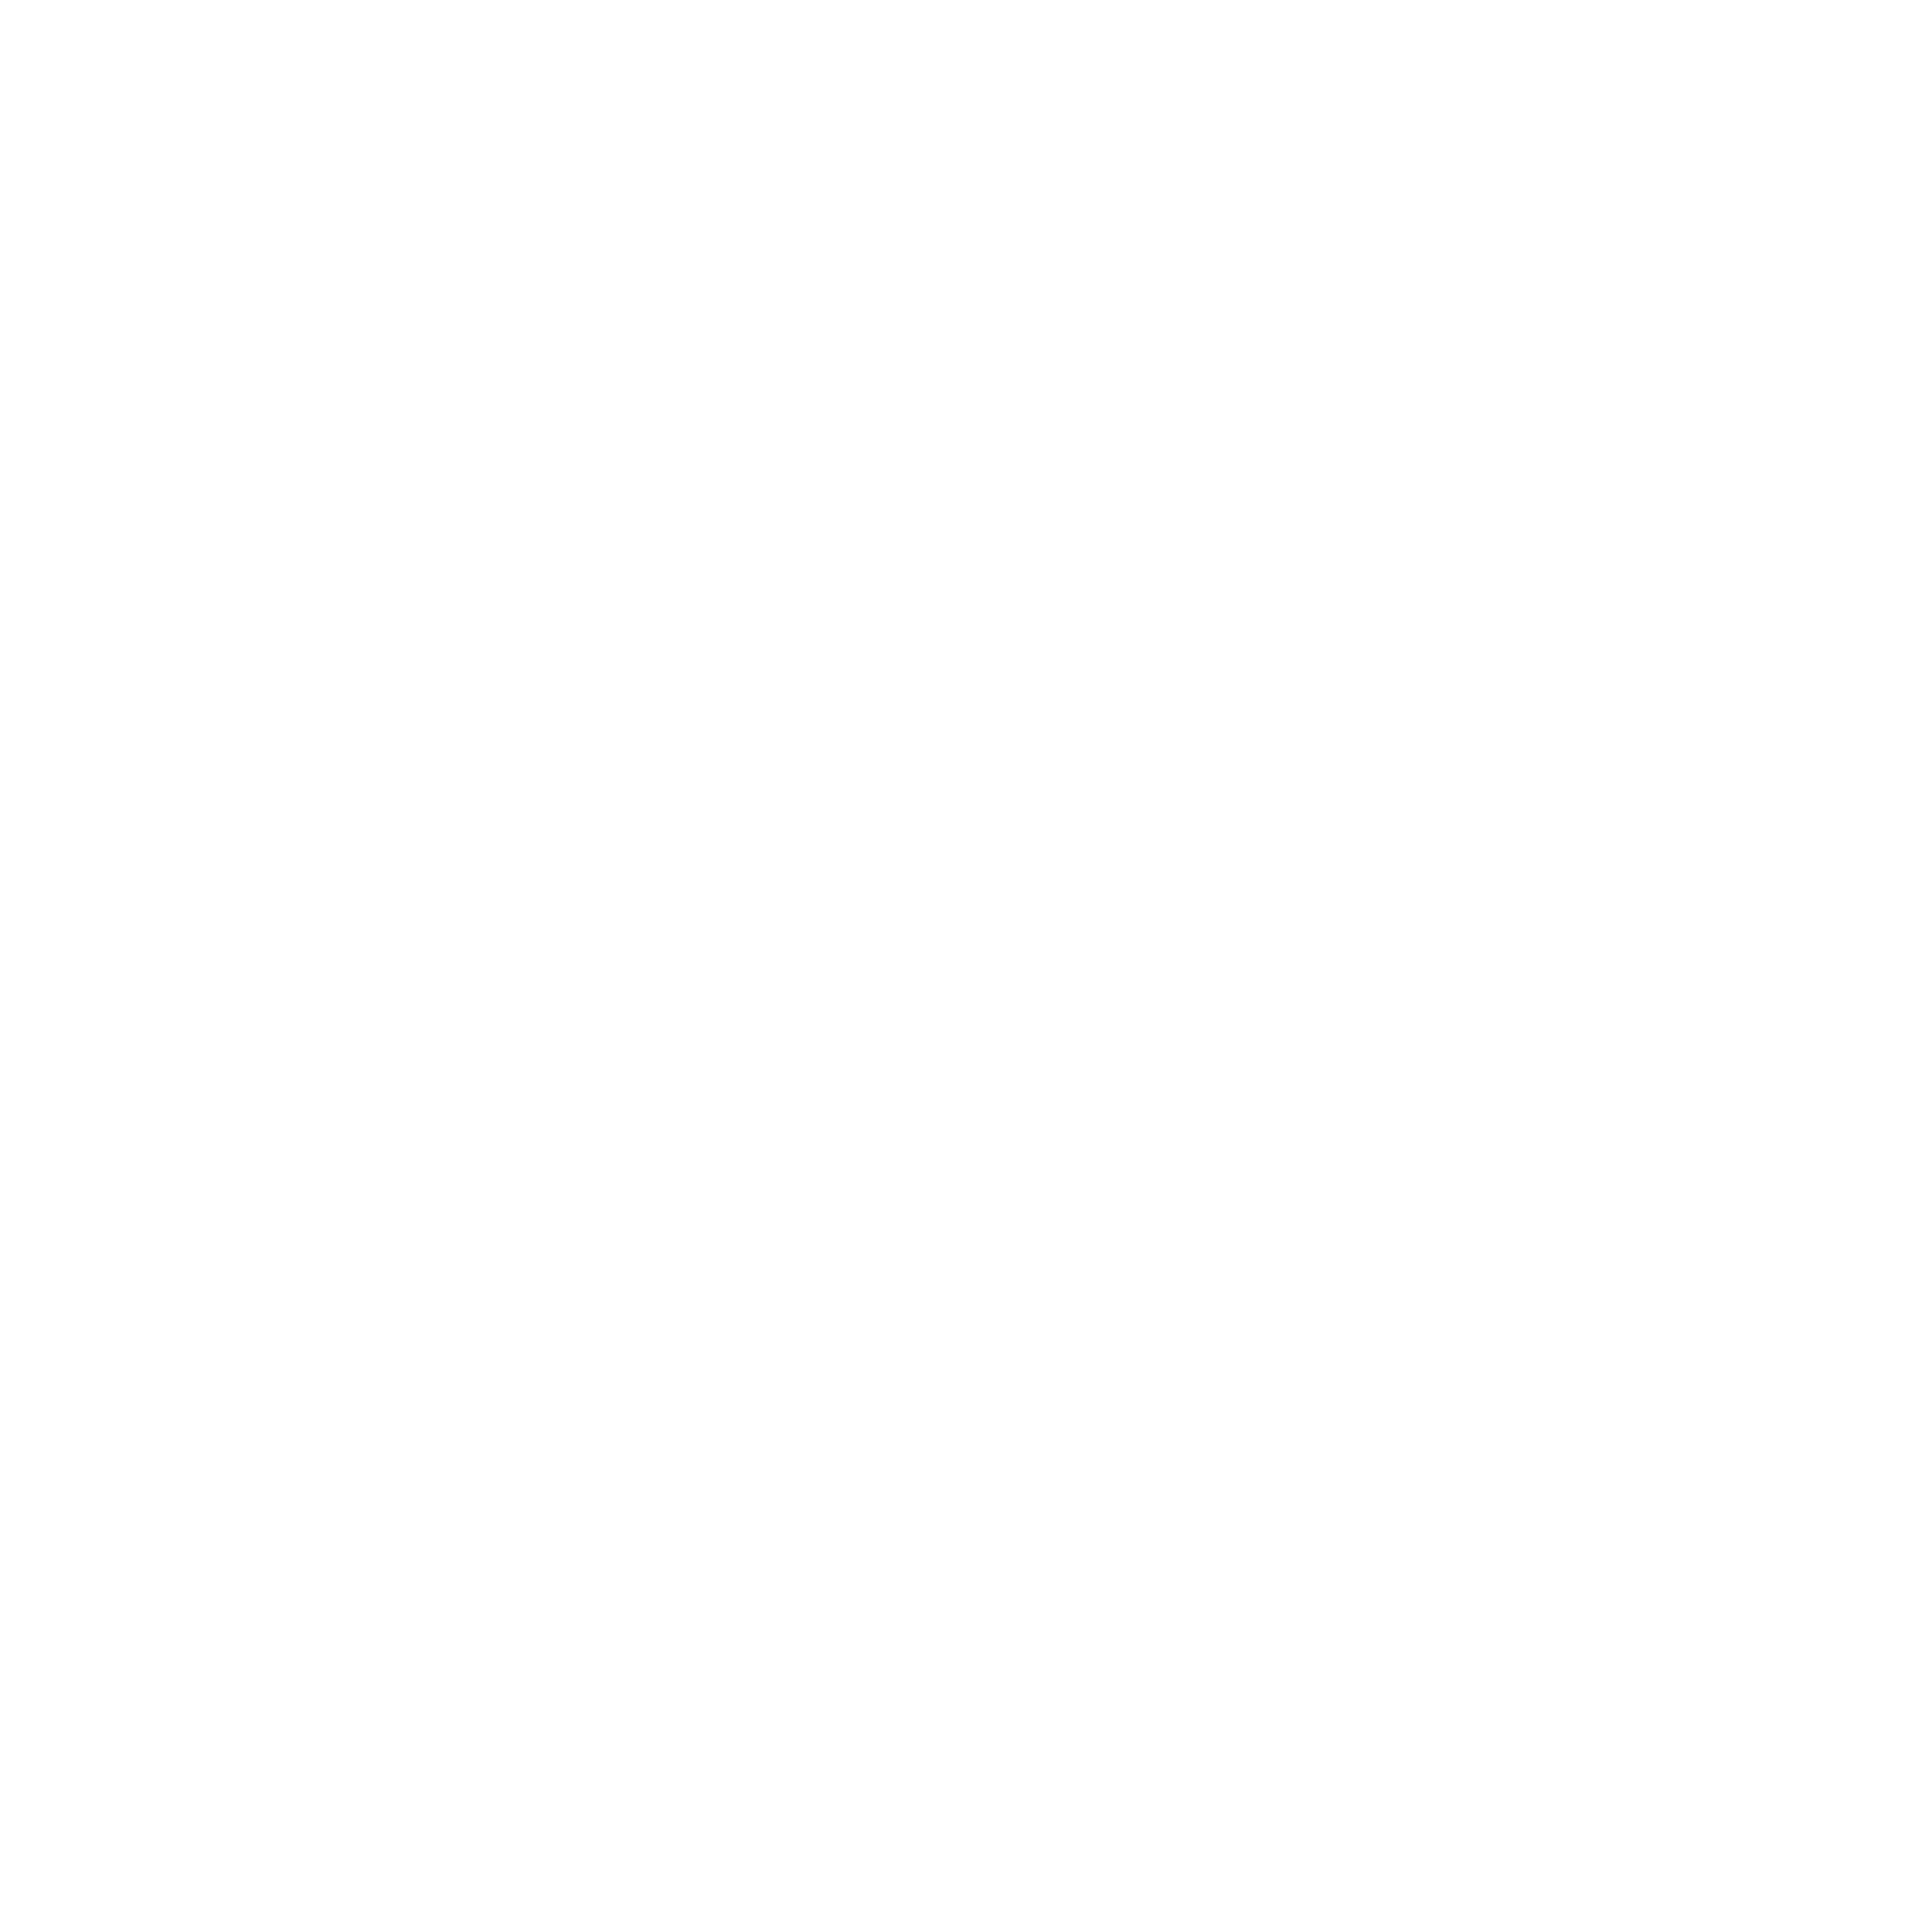 NXT Cryptocurrency icon